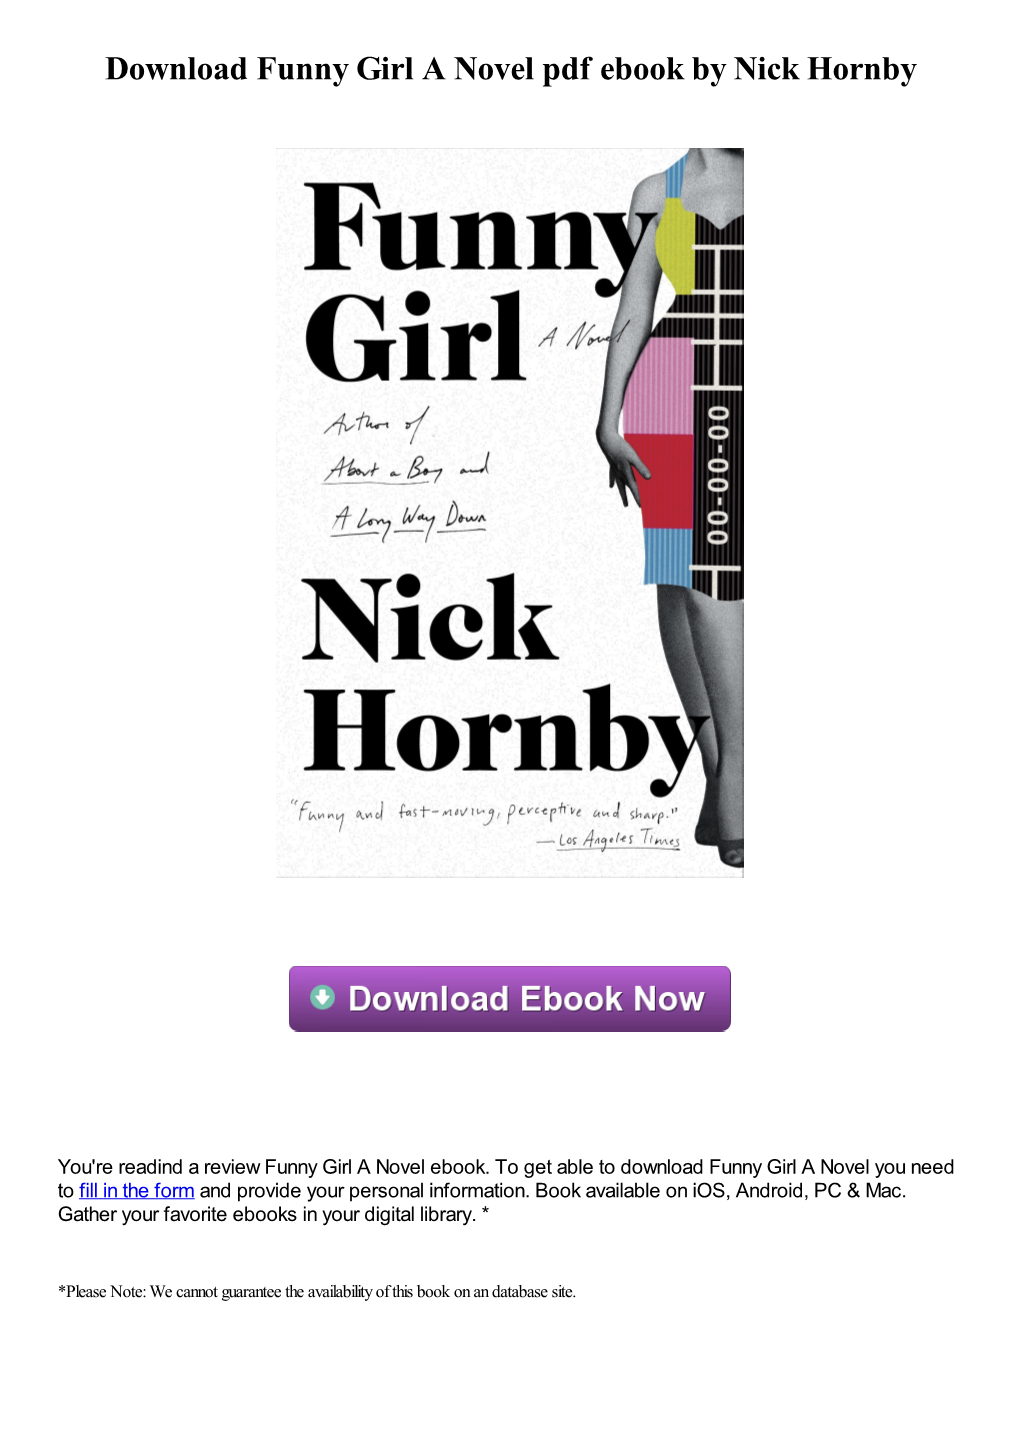 Download Funny Girl a Novel Pdf Ebook by Nick Hornby